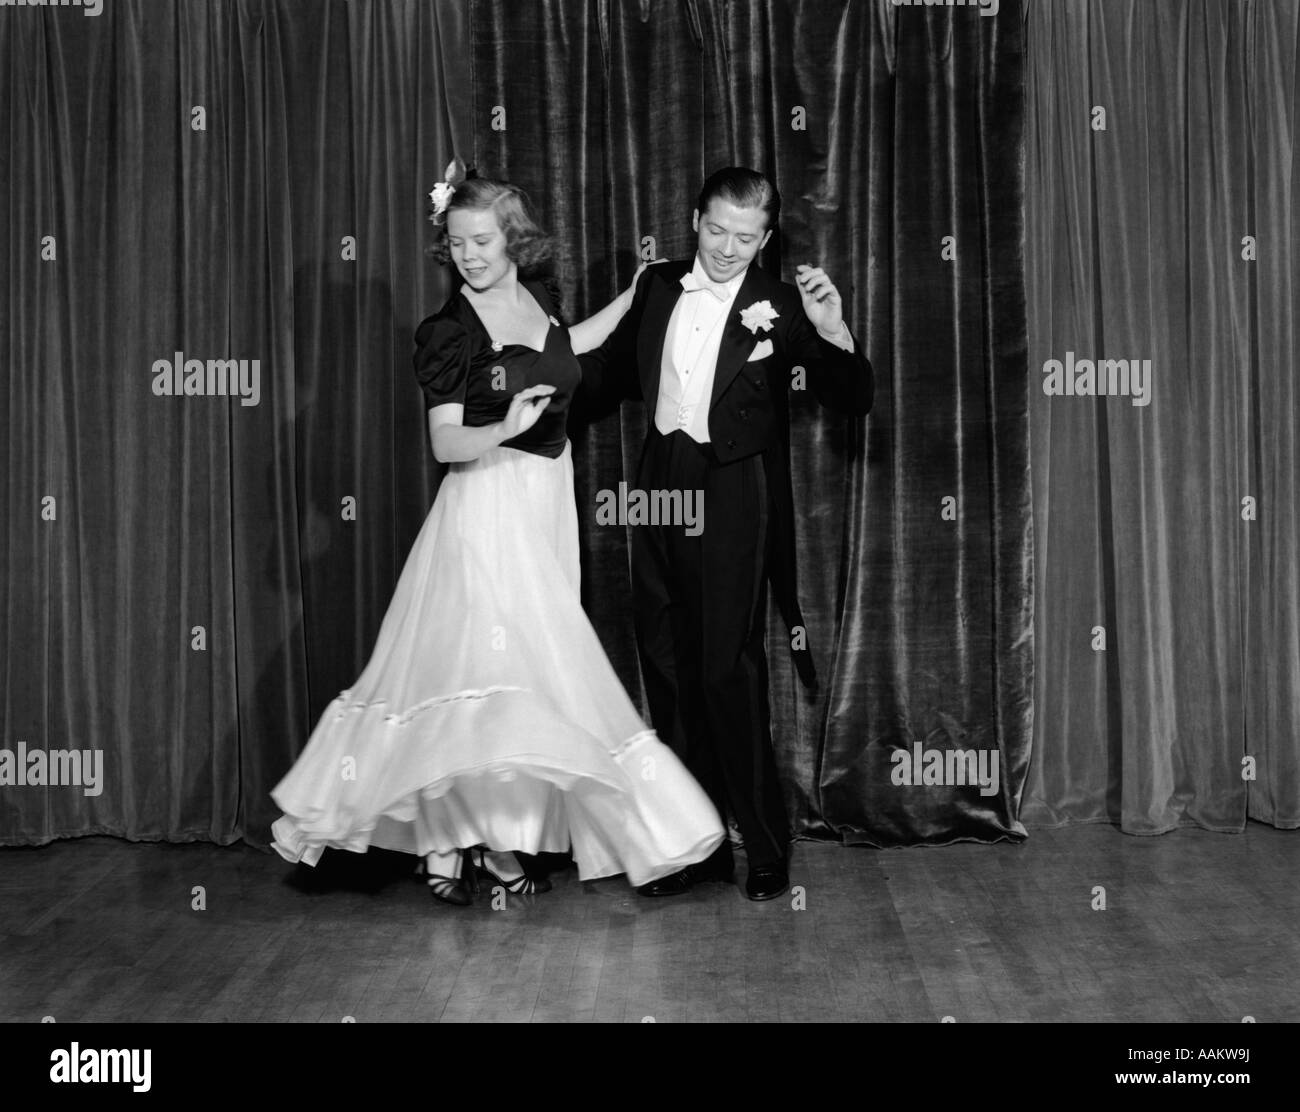 1940s COUPLE MAN AND WOMAN IN FORMAL WEAR BALLROOM DANCING ON STAGE Stock Photo